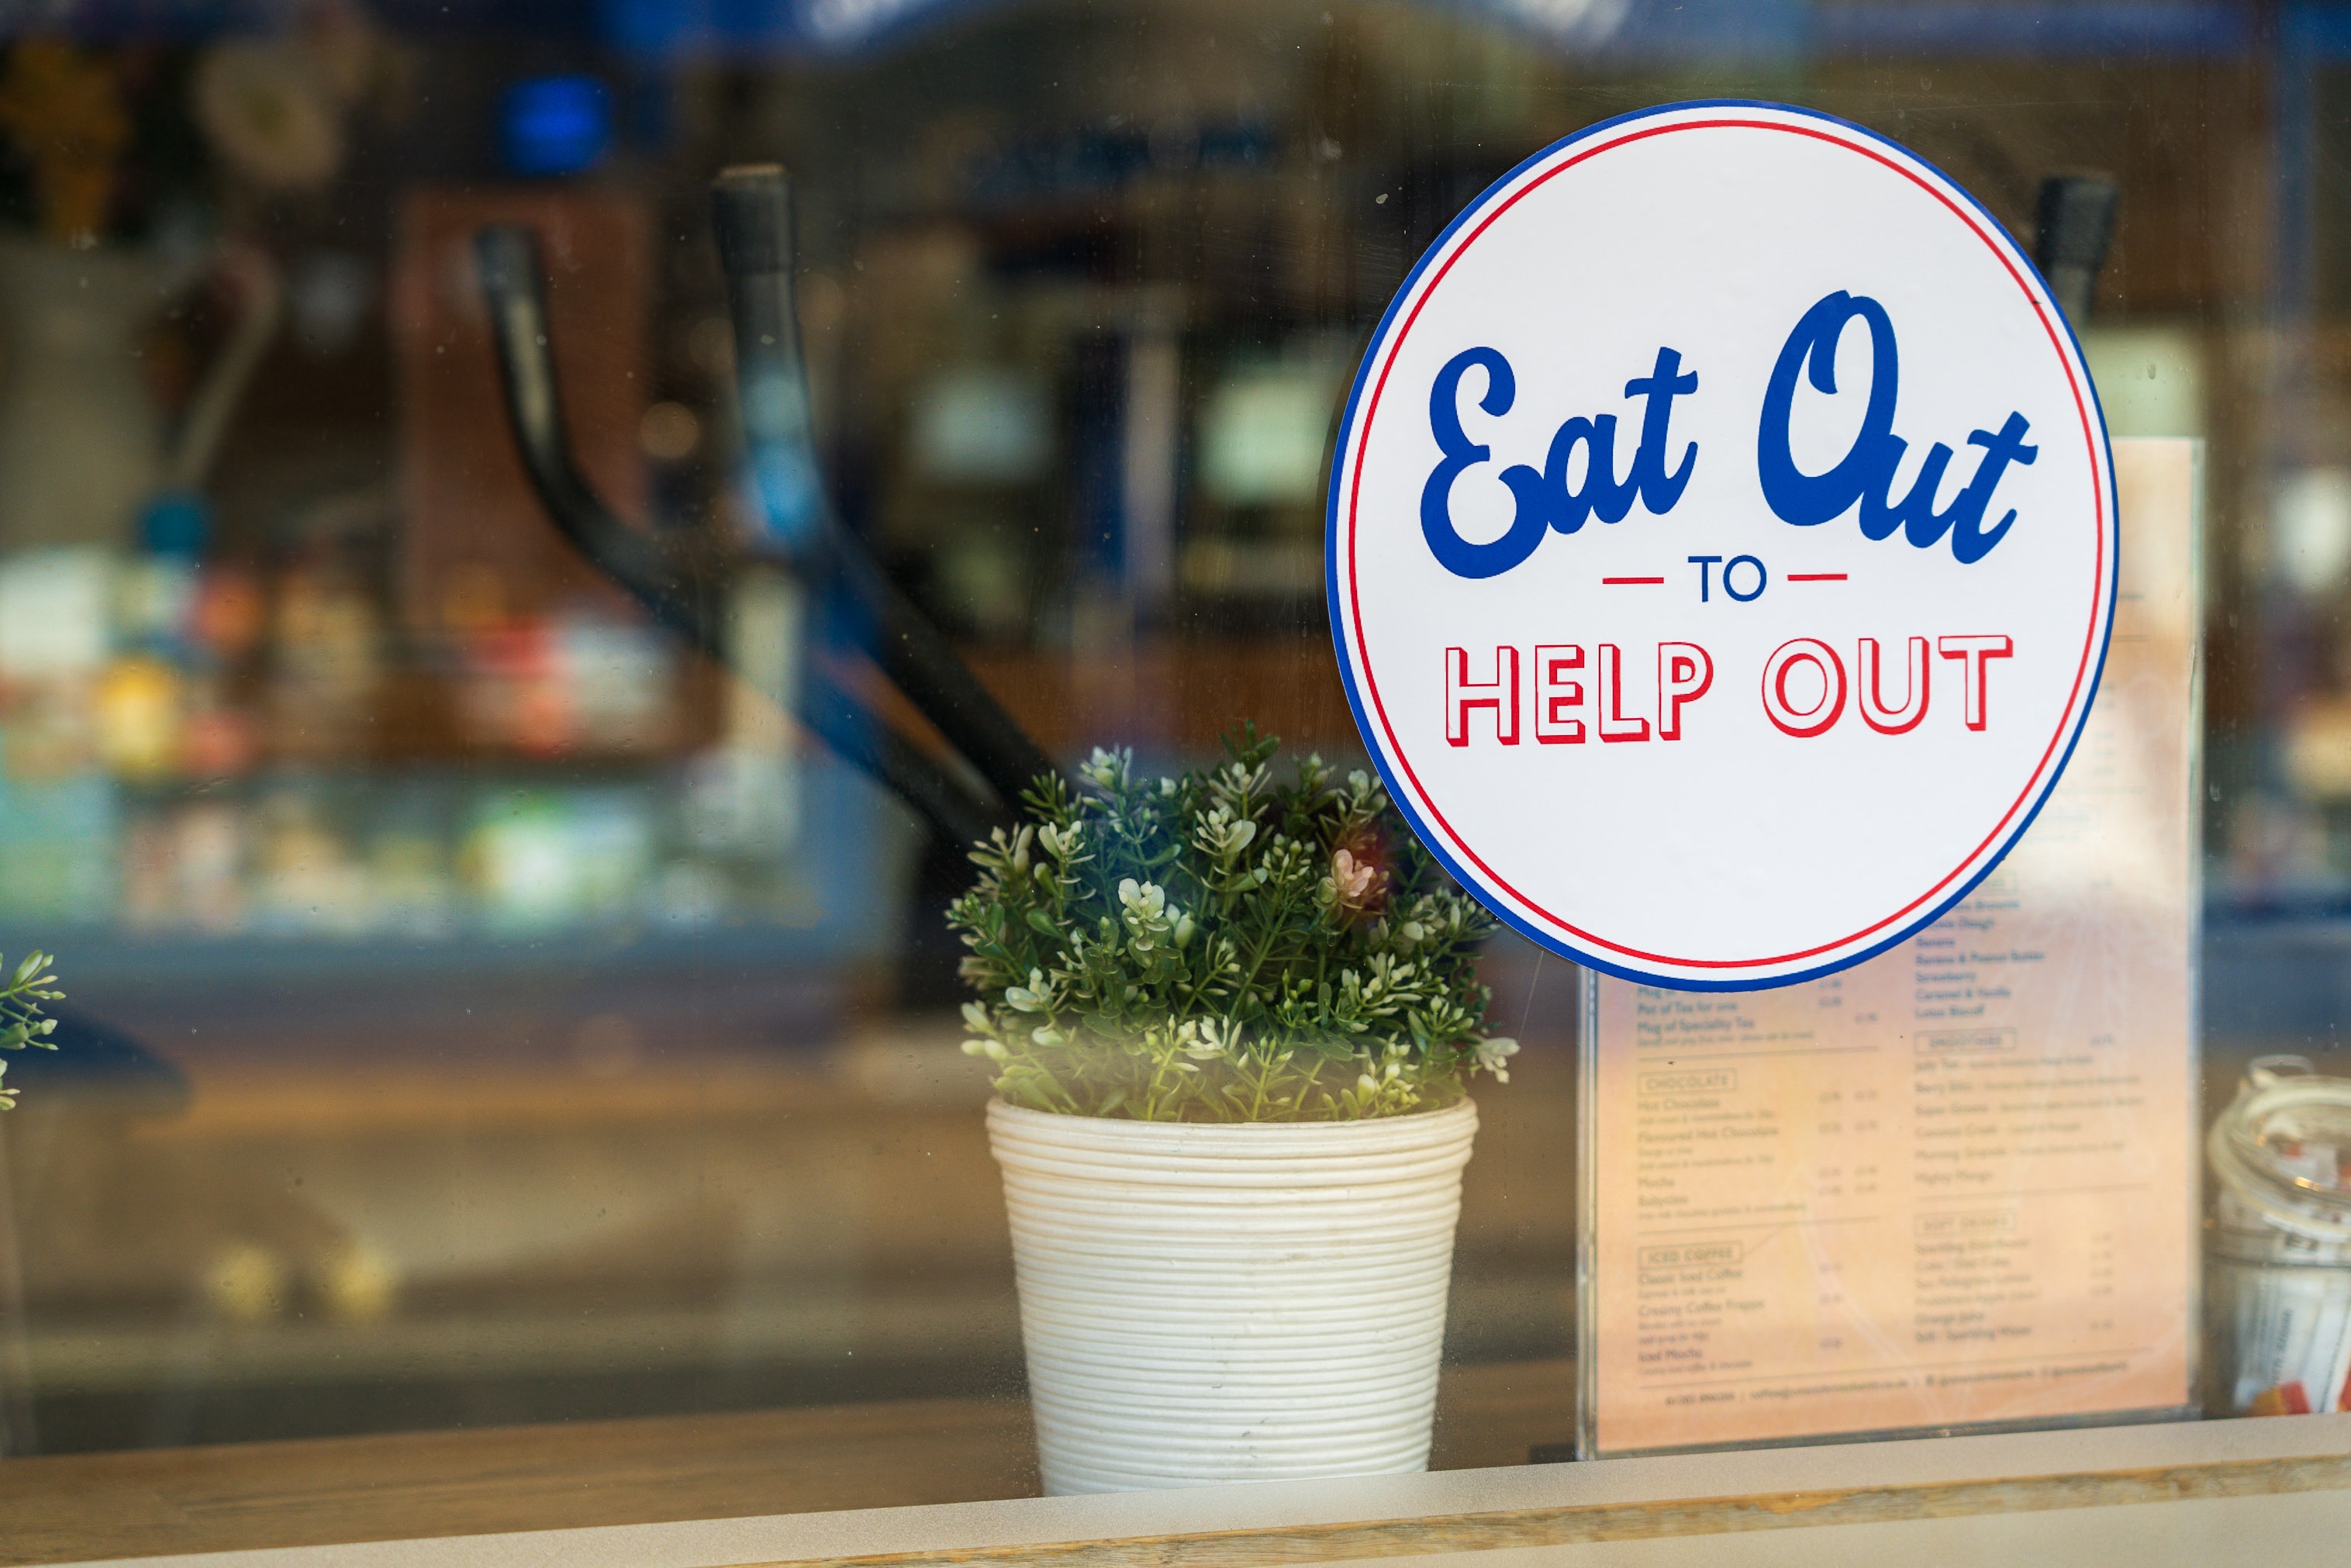 A photograph of a café window displaying the 'Eat Out to Help Out' logo